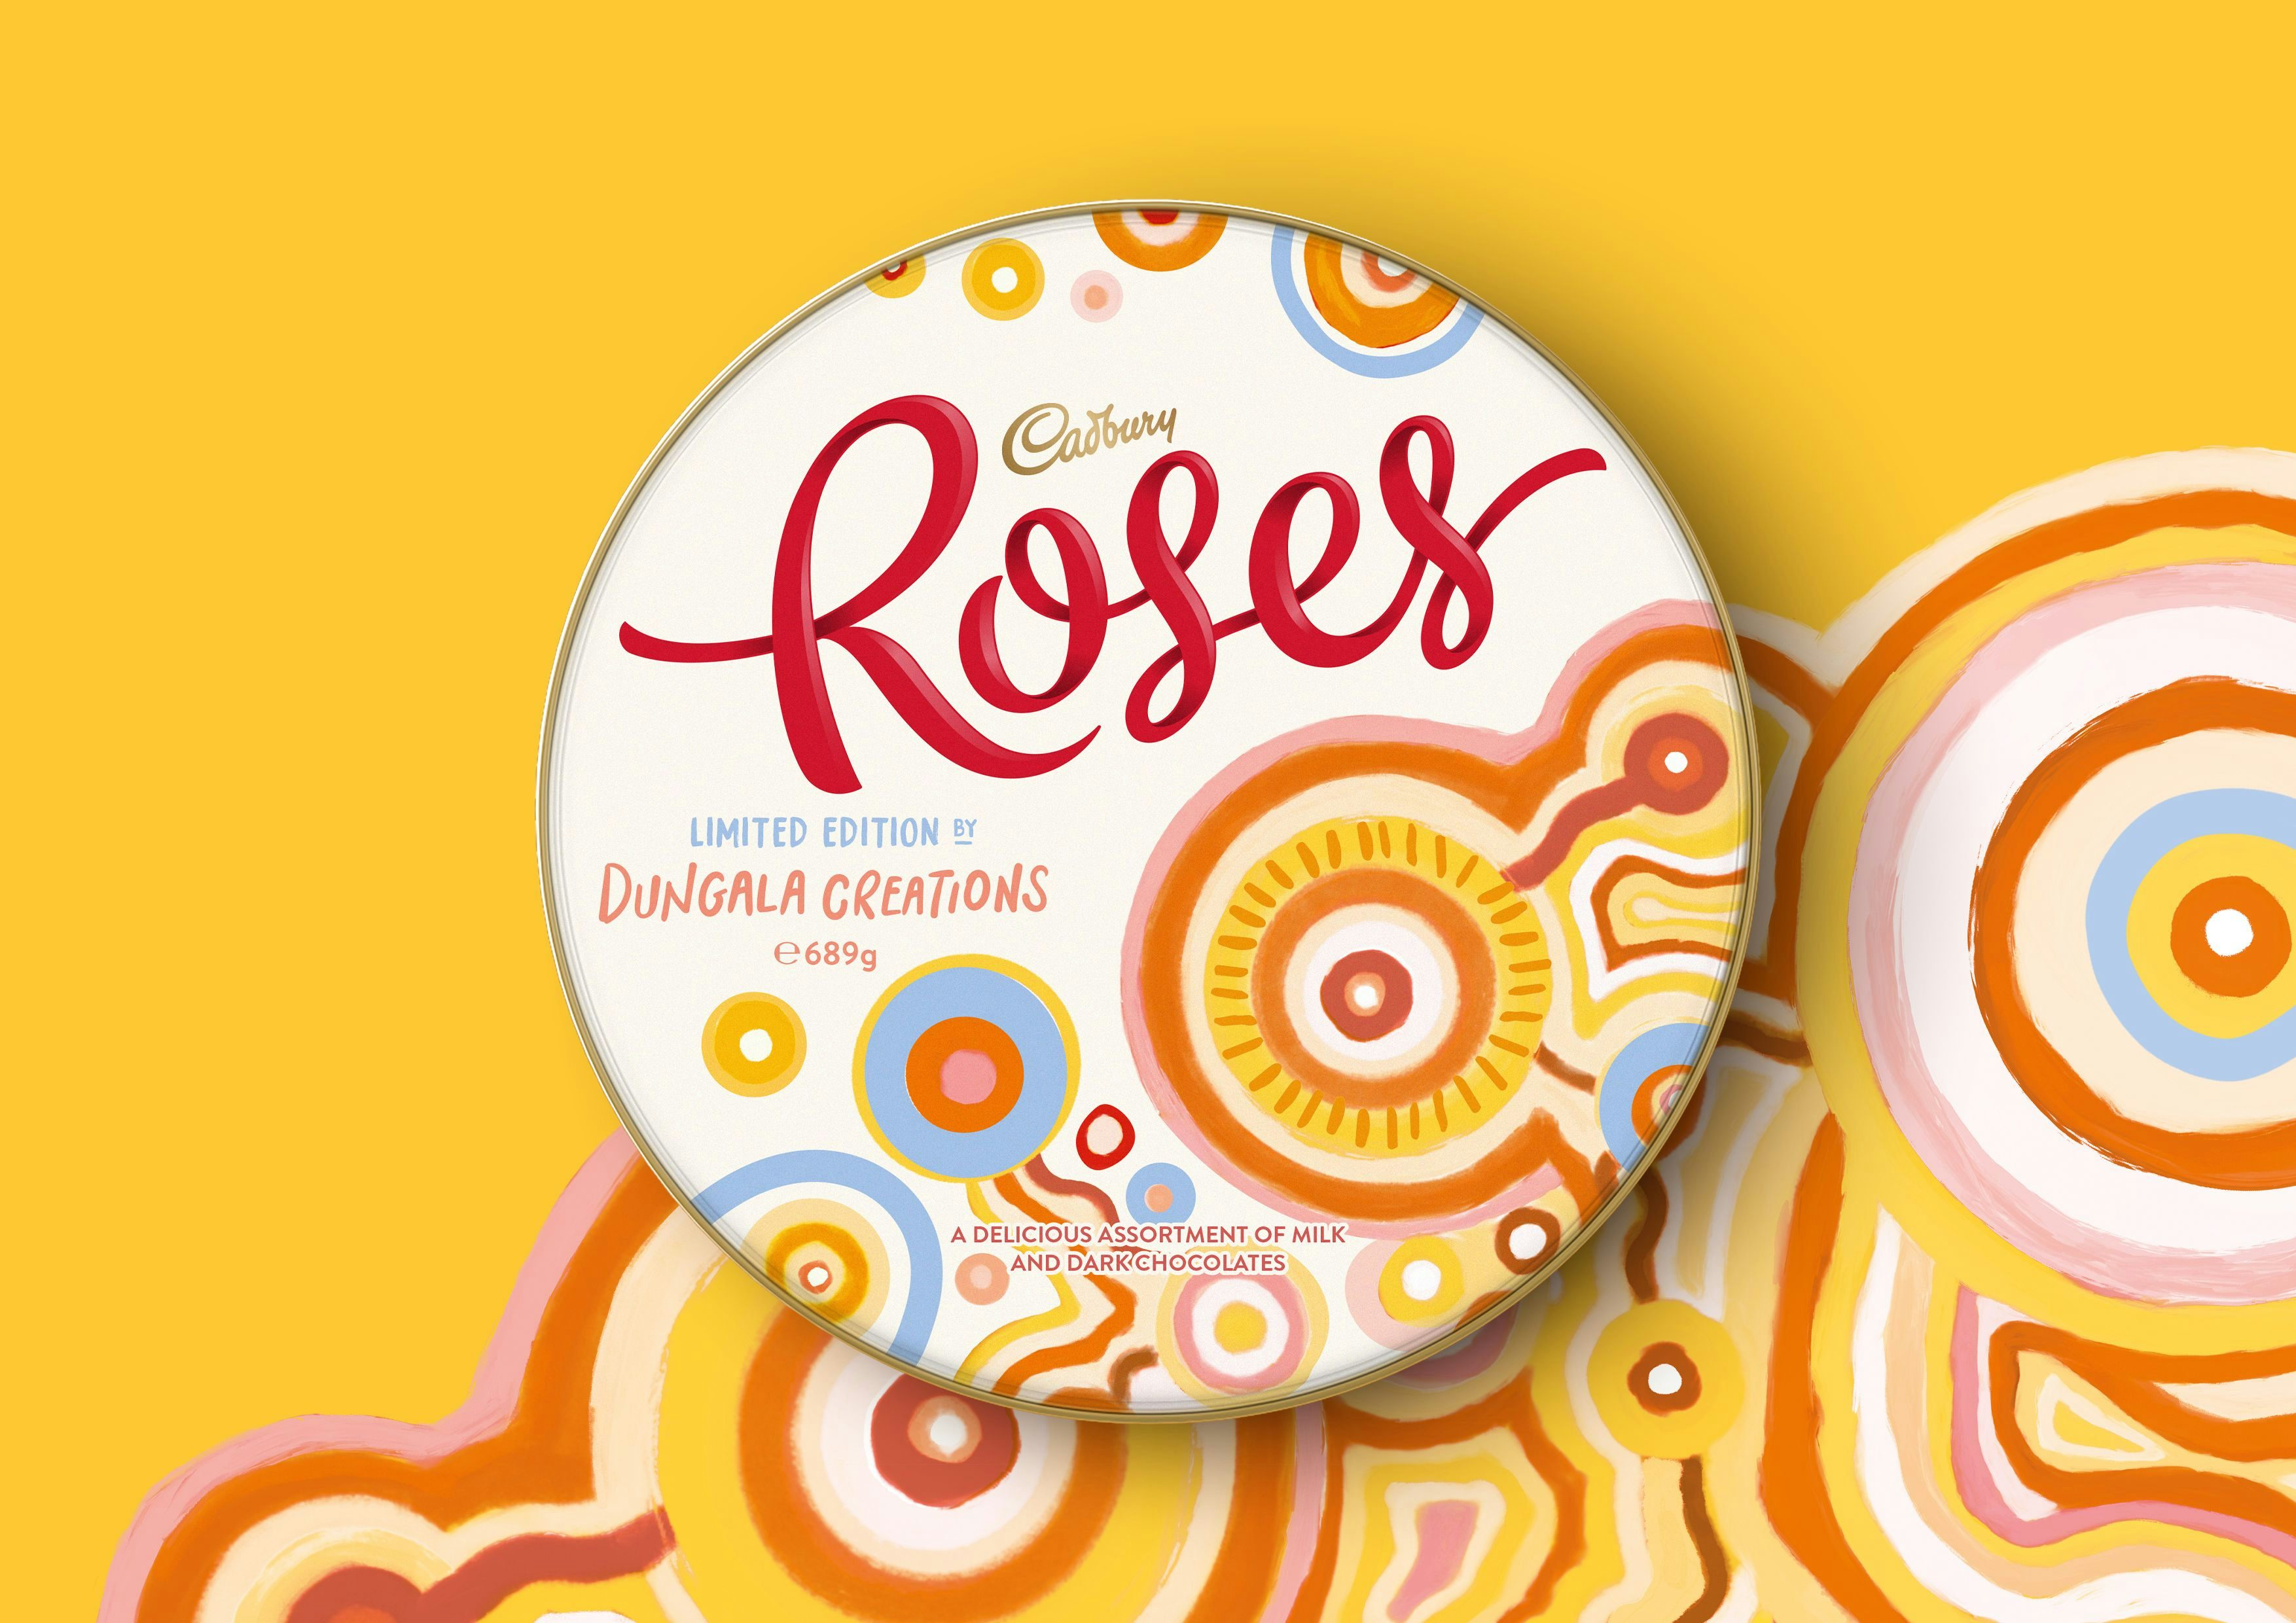 Thumbnail image for project: Cadbury Roses X Dungala Creations